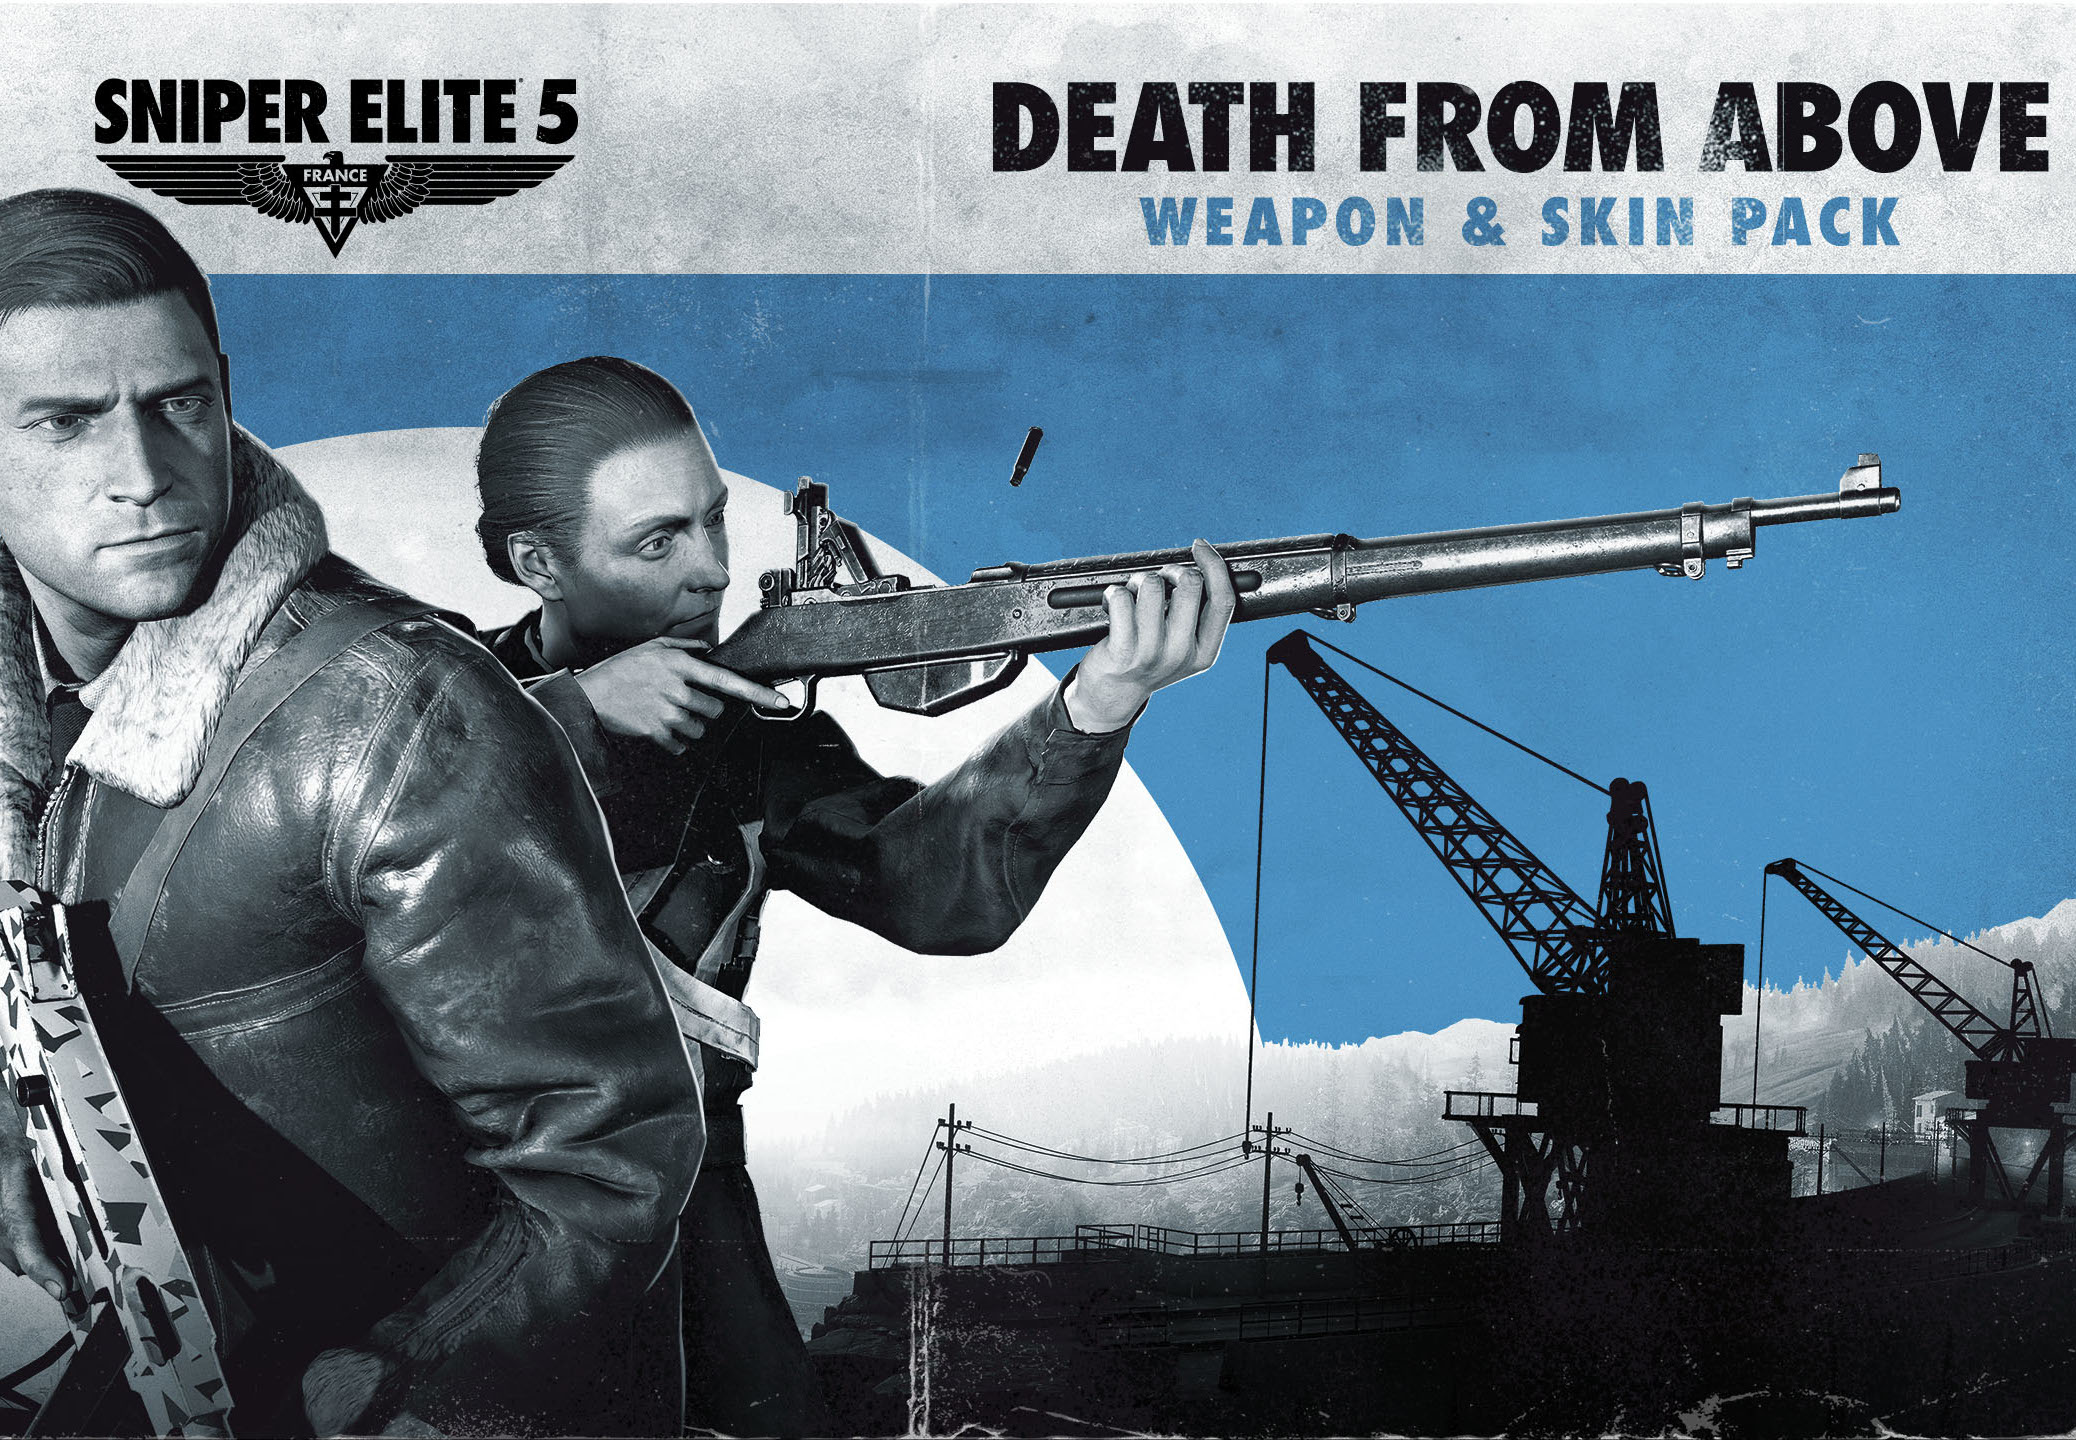 Sniper Elite 5 - Death From Above Weapon And Skin Pack DLC AR XBOX One / Xbox Series X|S / Windows 10 CD Key